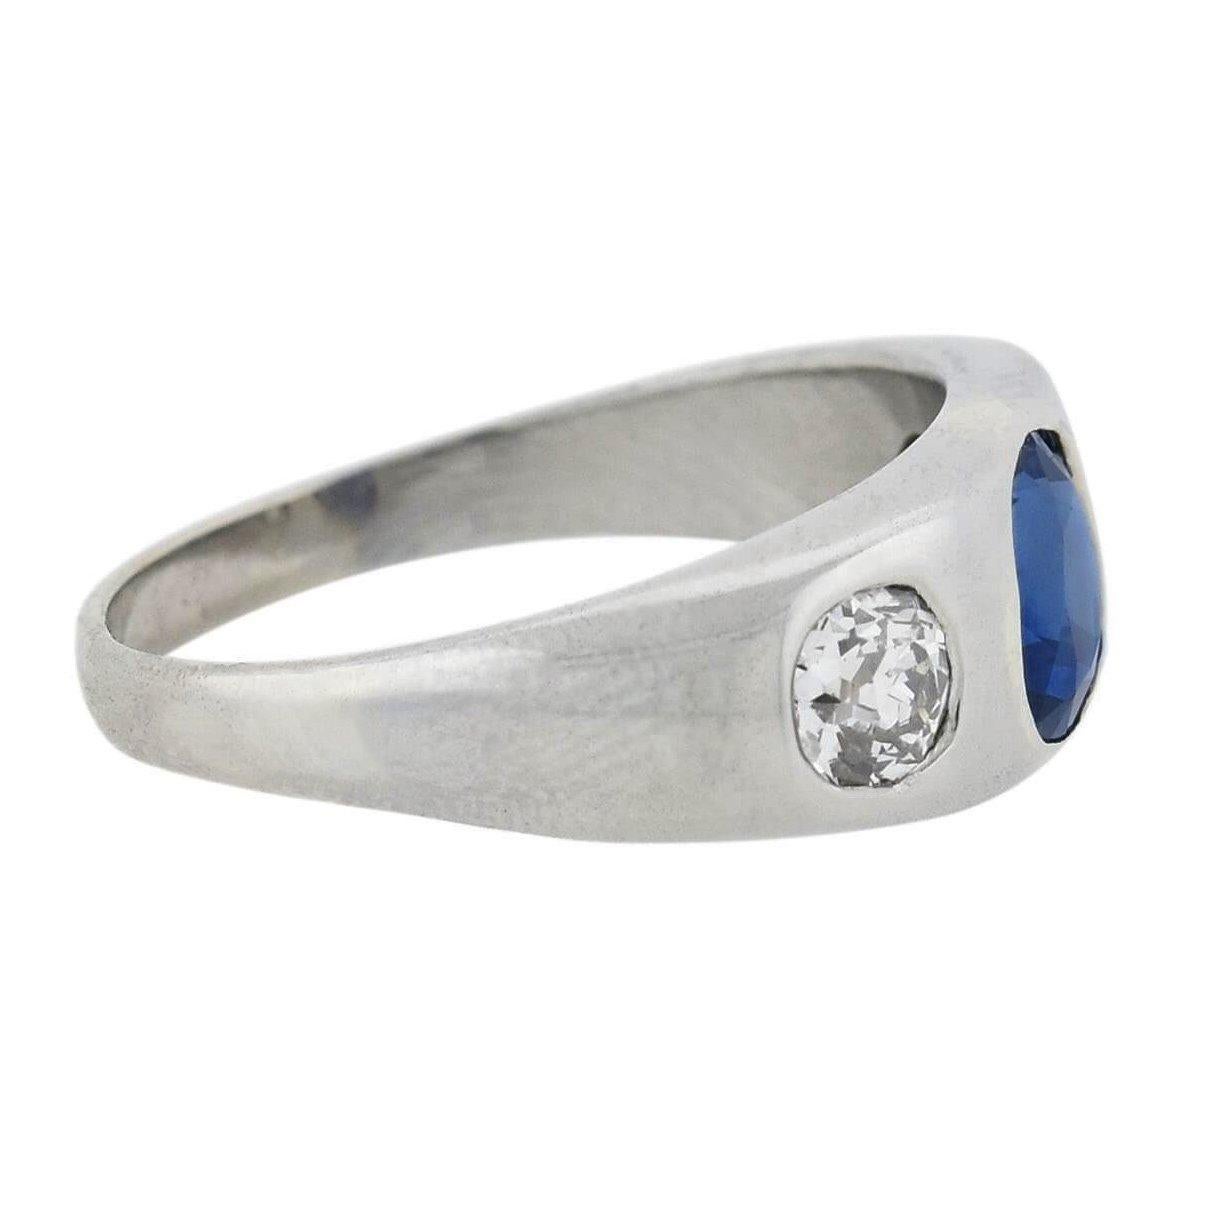 A beautiful diamond and sapphire three stone ring from the Edwardian (ca1910s) era! This stunning piece is crafted in solid platinum and features a sapphire center with two sparkling diamonds resting on either side. The vibrant sapphire is oval in